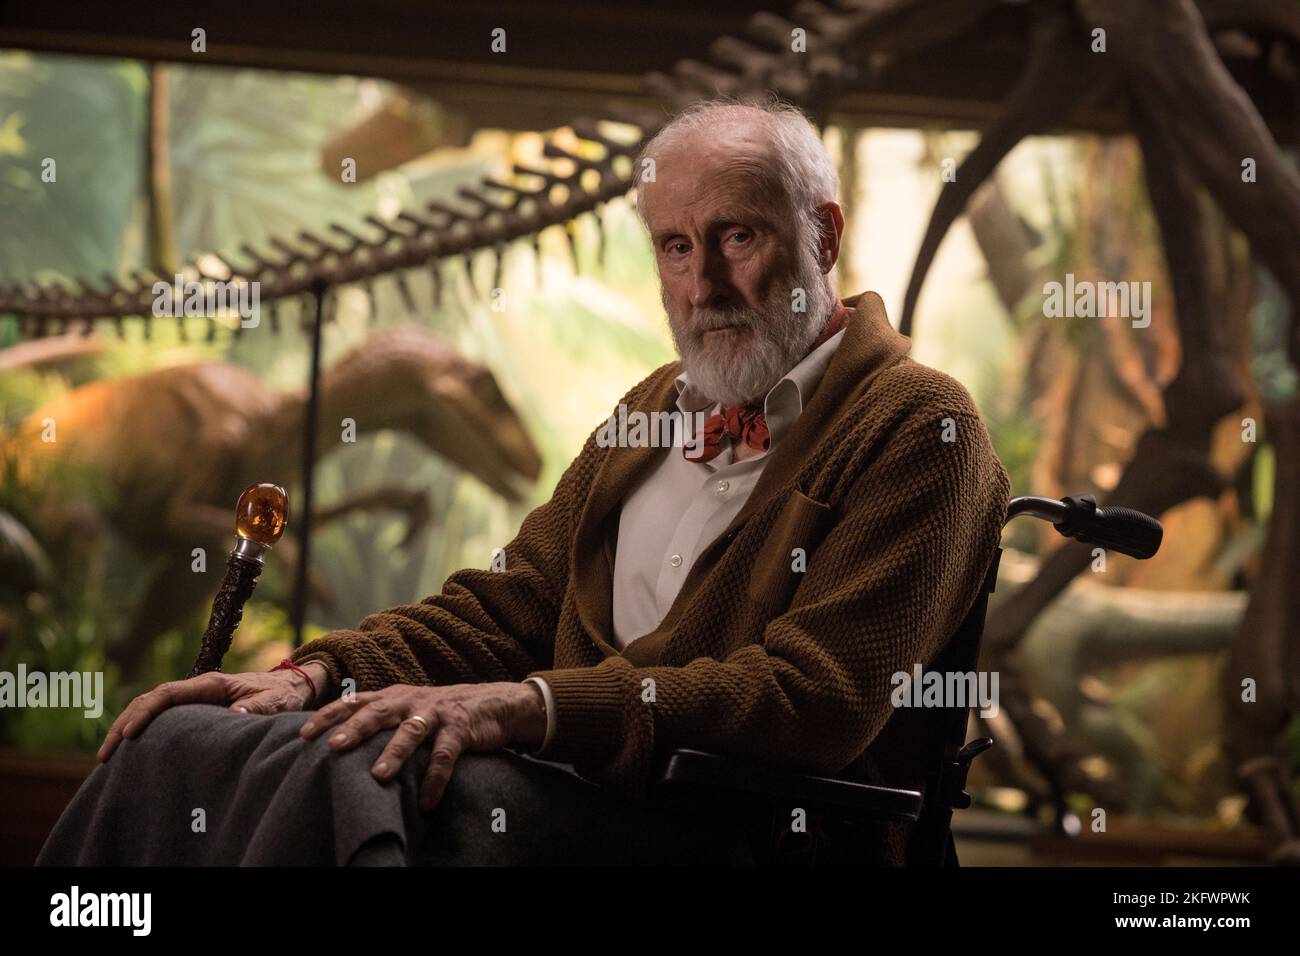 JAMES CROMWELL in JURASSIC WORLD: FALLEN KINDOM (2018) -Original title: JURASSIC WORLD: FALLEN KINGDOM-, directed by JUAN ANTONIO BAYONA. Credit: Amblin ent/Apaches Ent/Legendary Ent/Universal Pictures / Album Stock Photo